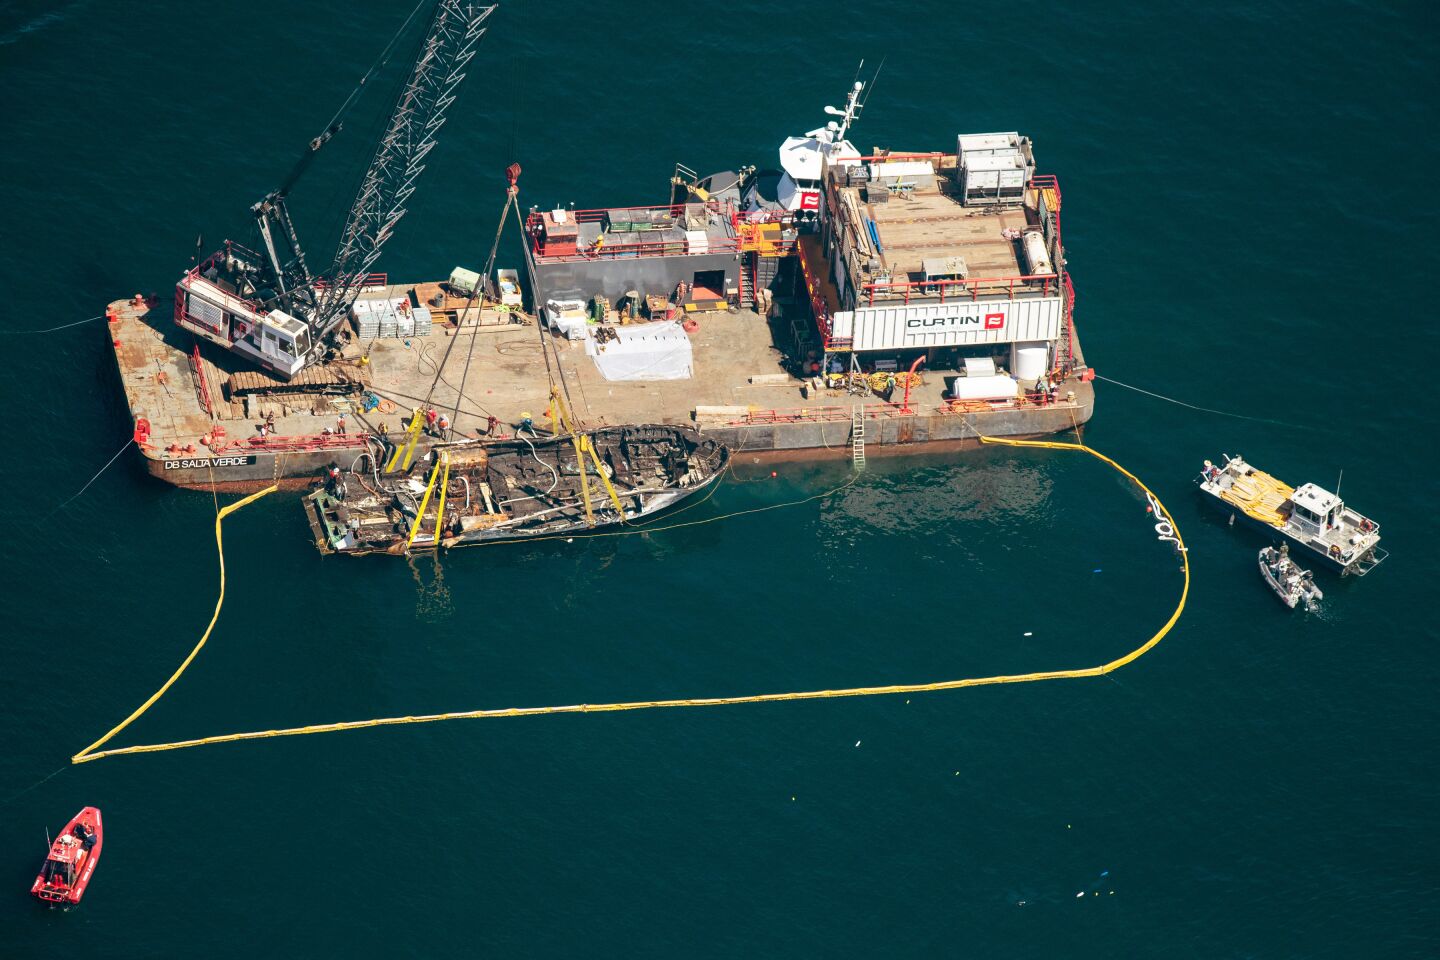 The burned hulk of the Conception is brought to the surface by a salvage team off Santa Cruz Island.